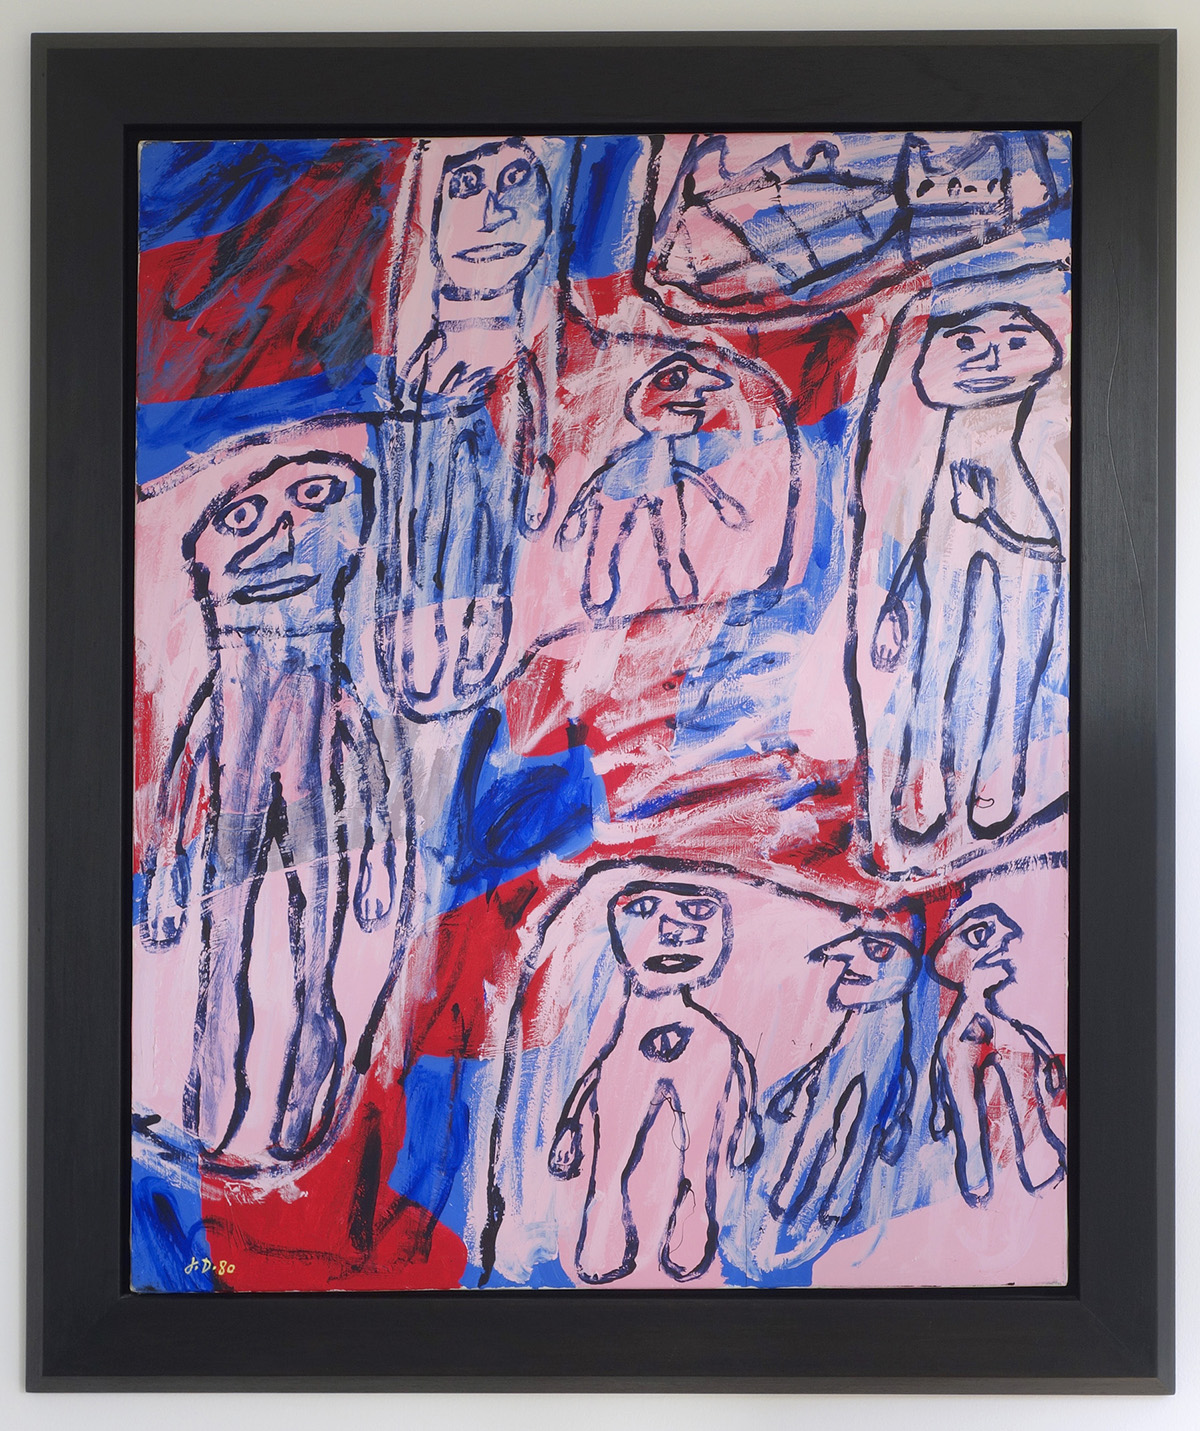 Abstract painting featuring multiple figures in pink, red and blue